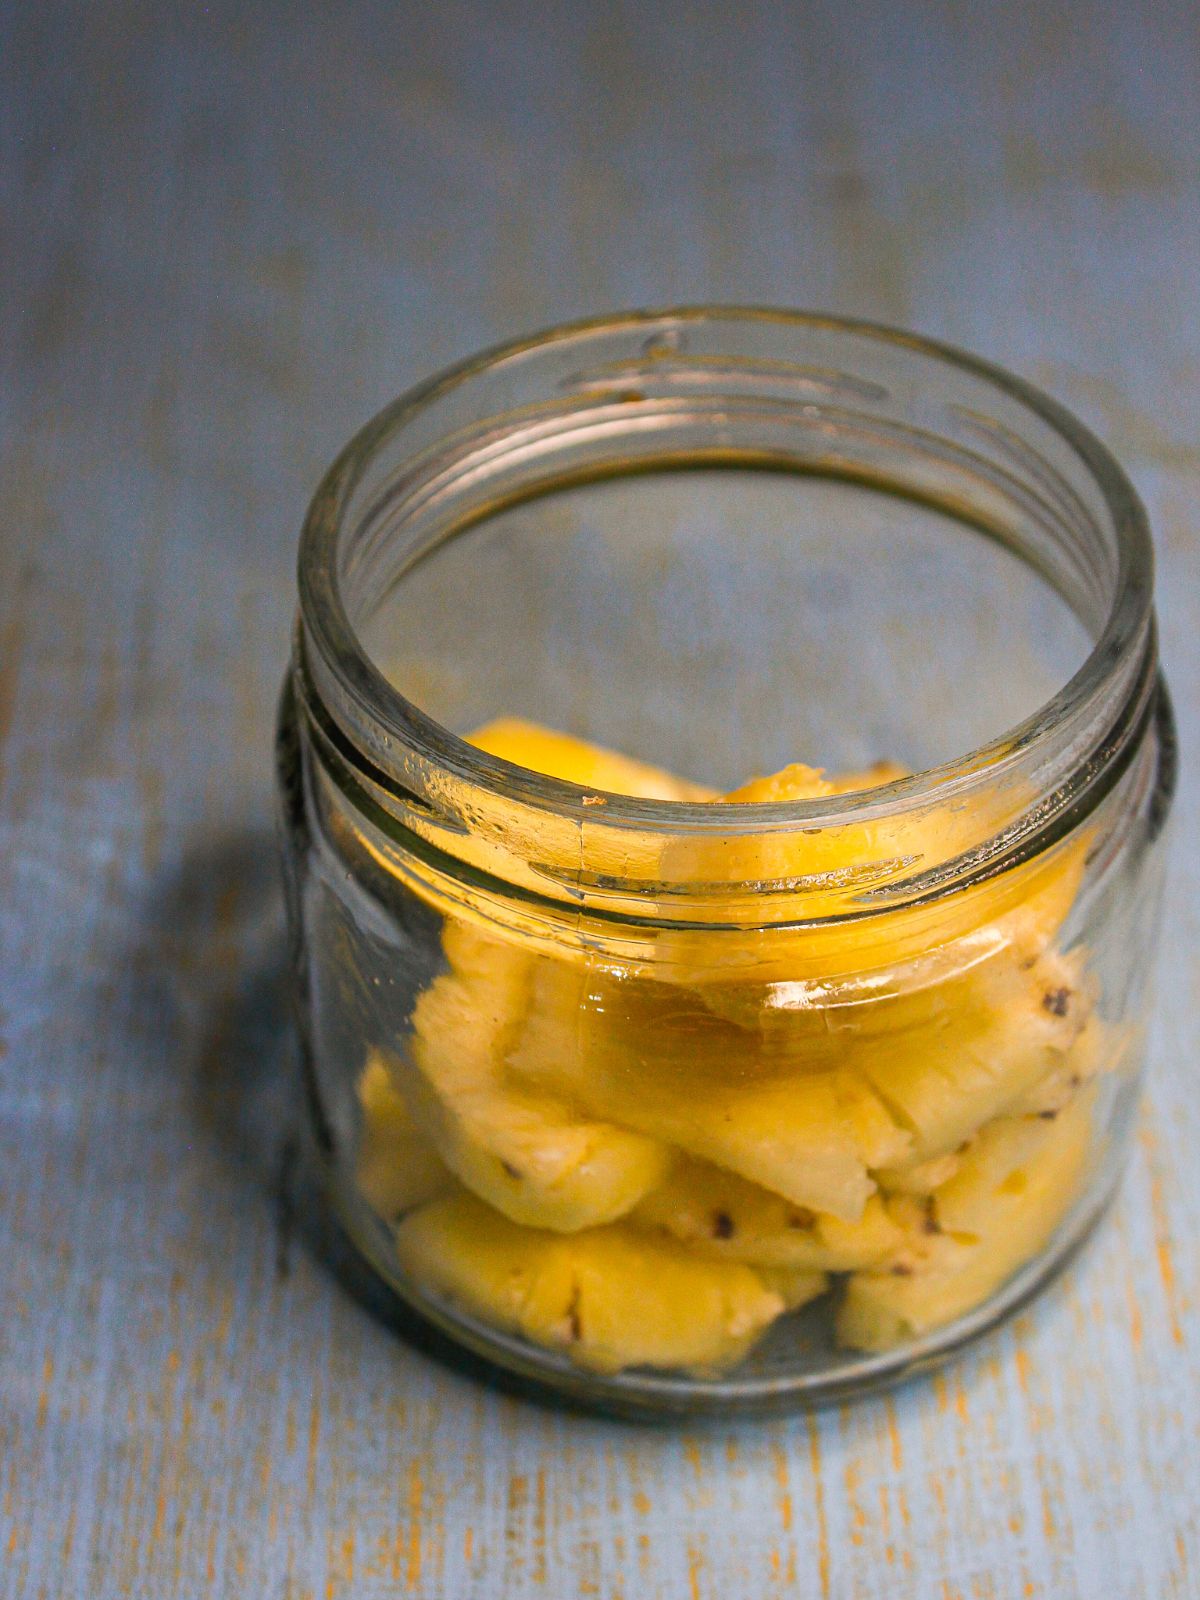 add pineapple pieces into the jar